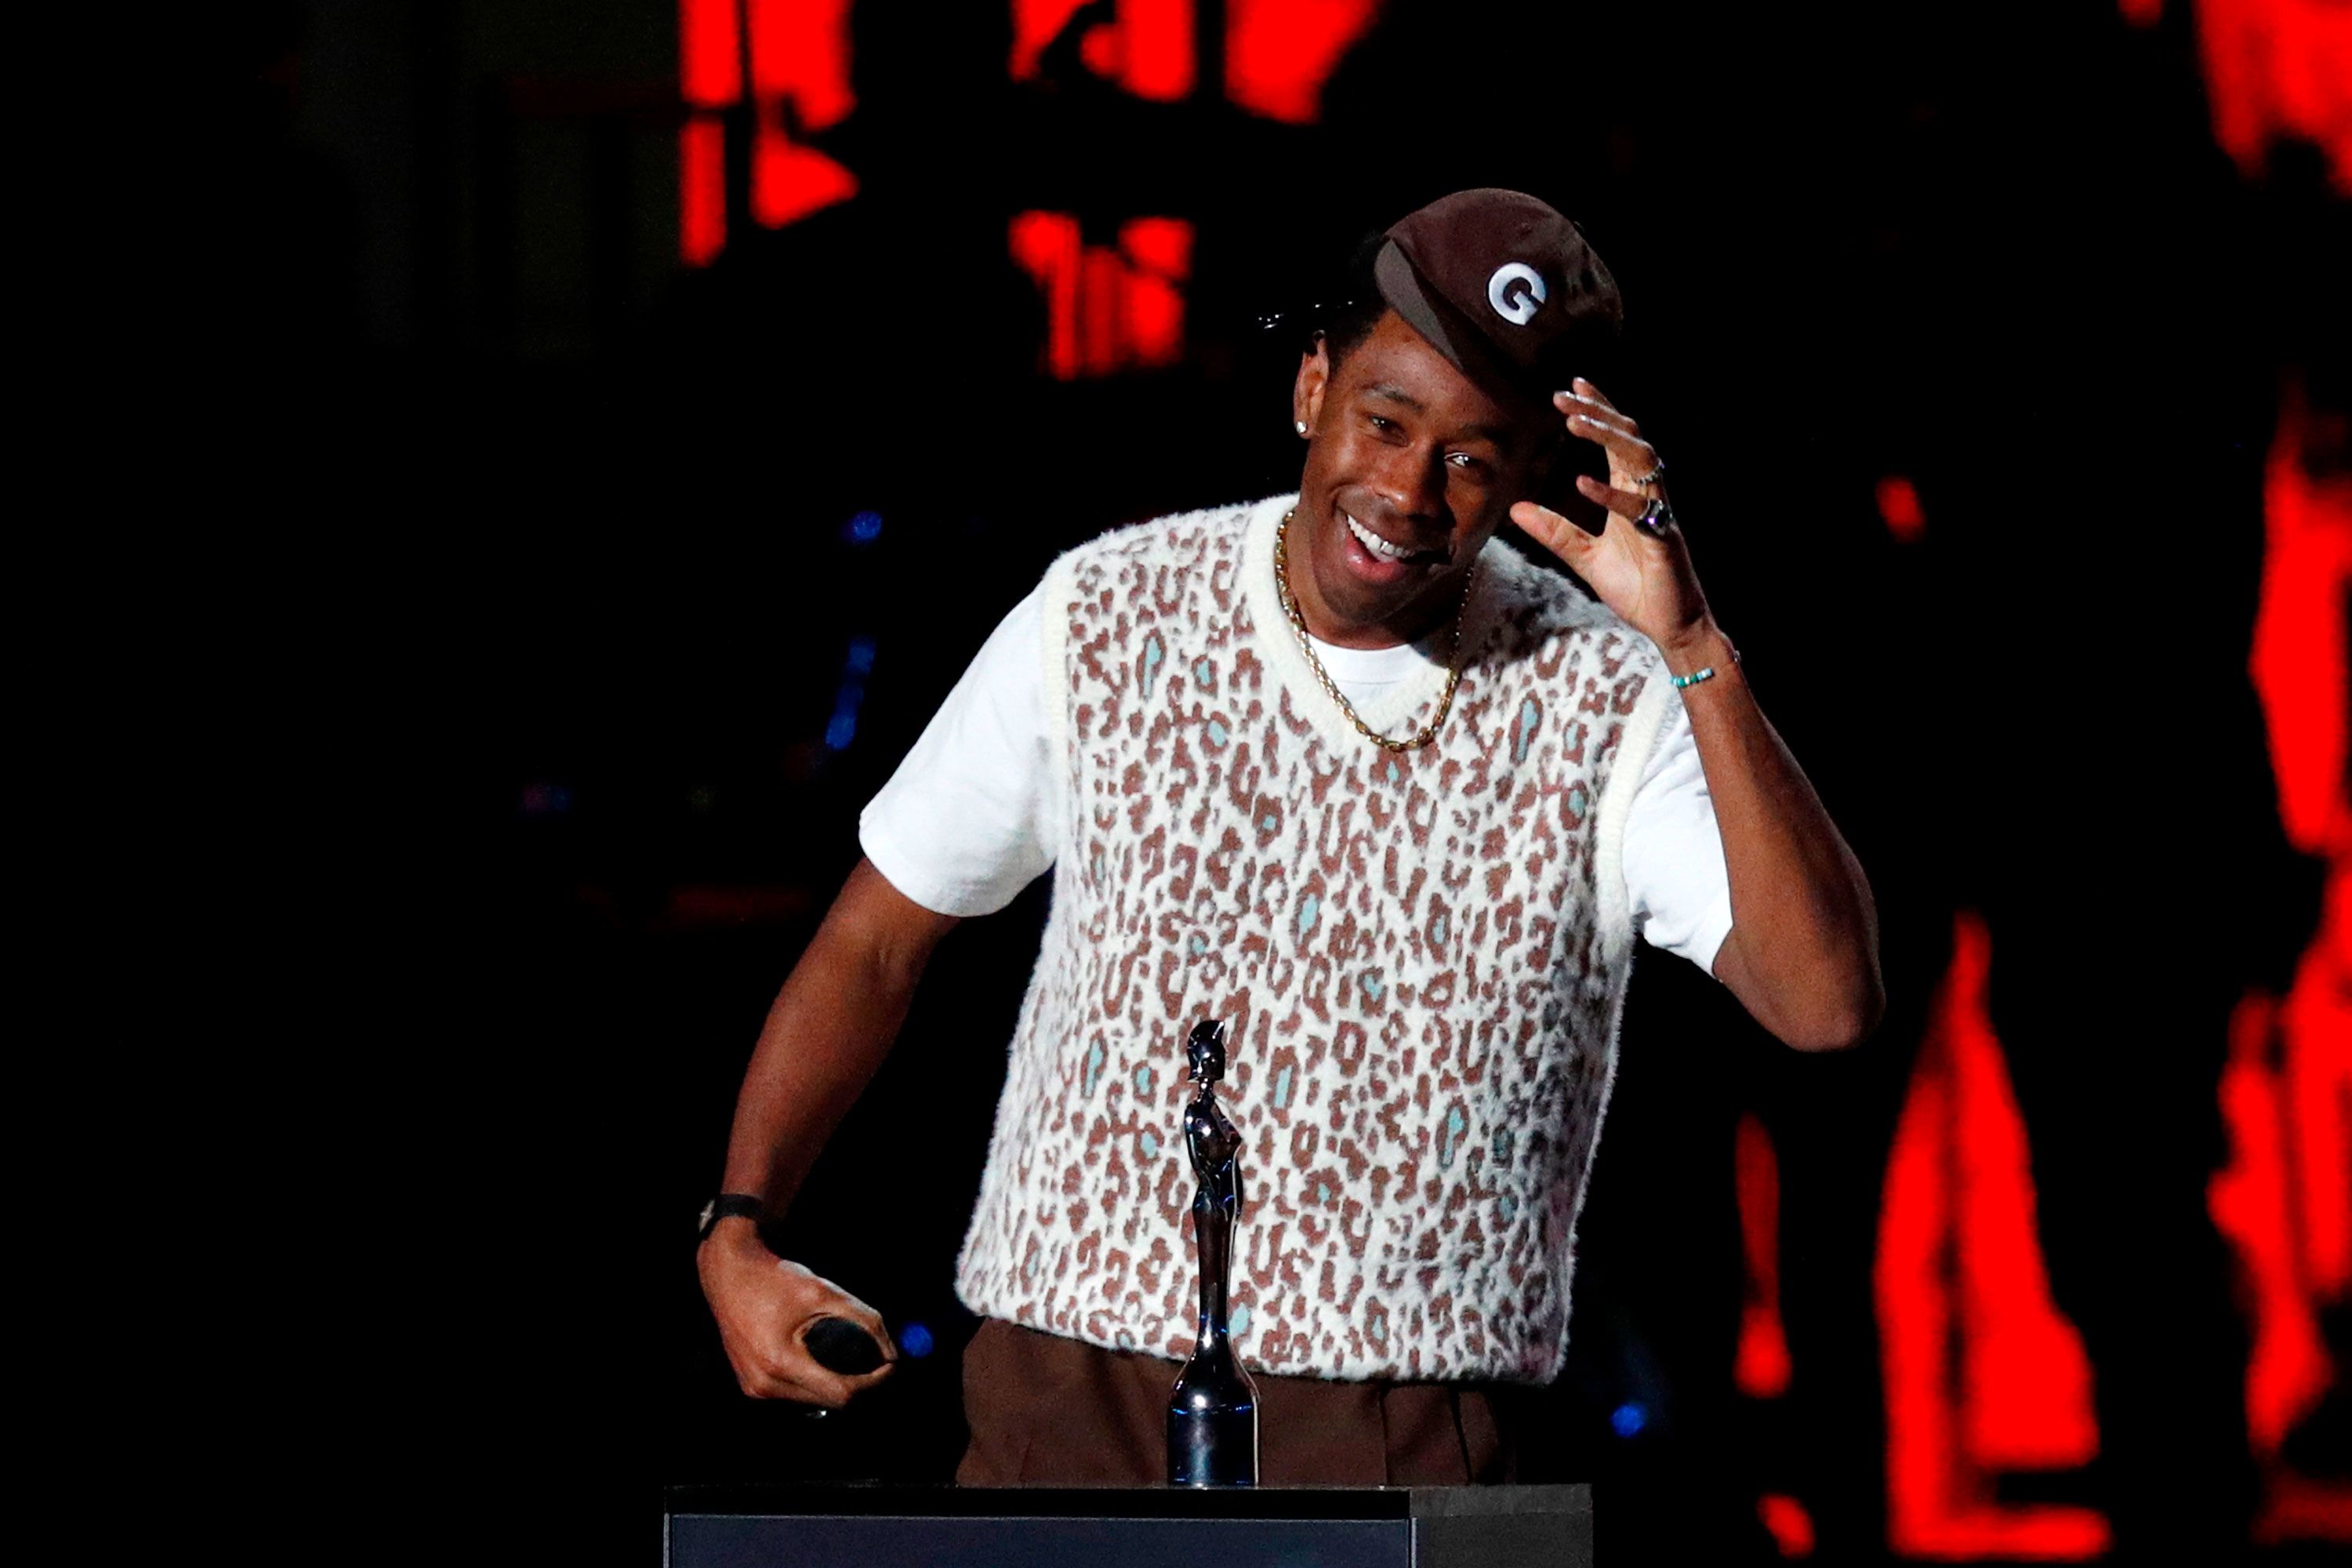 Tyler, The Creator announces ne walbum Call me if you get lost